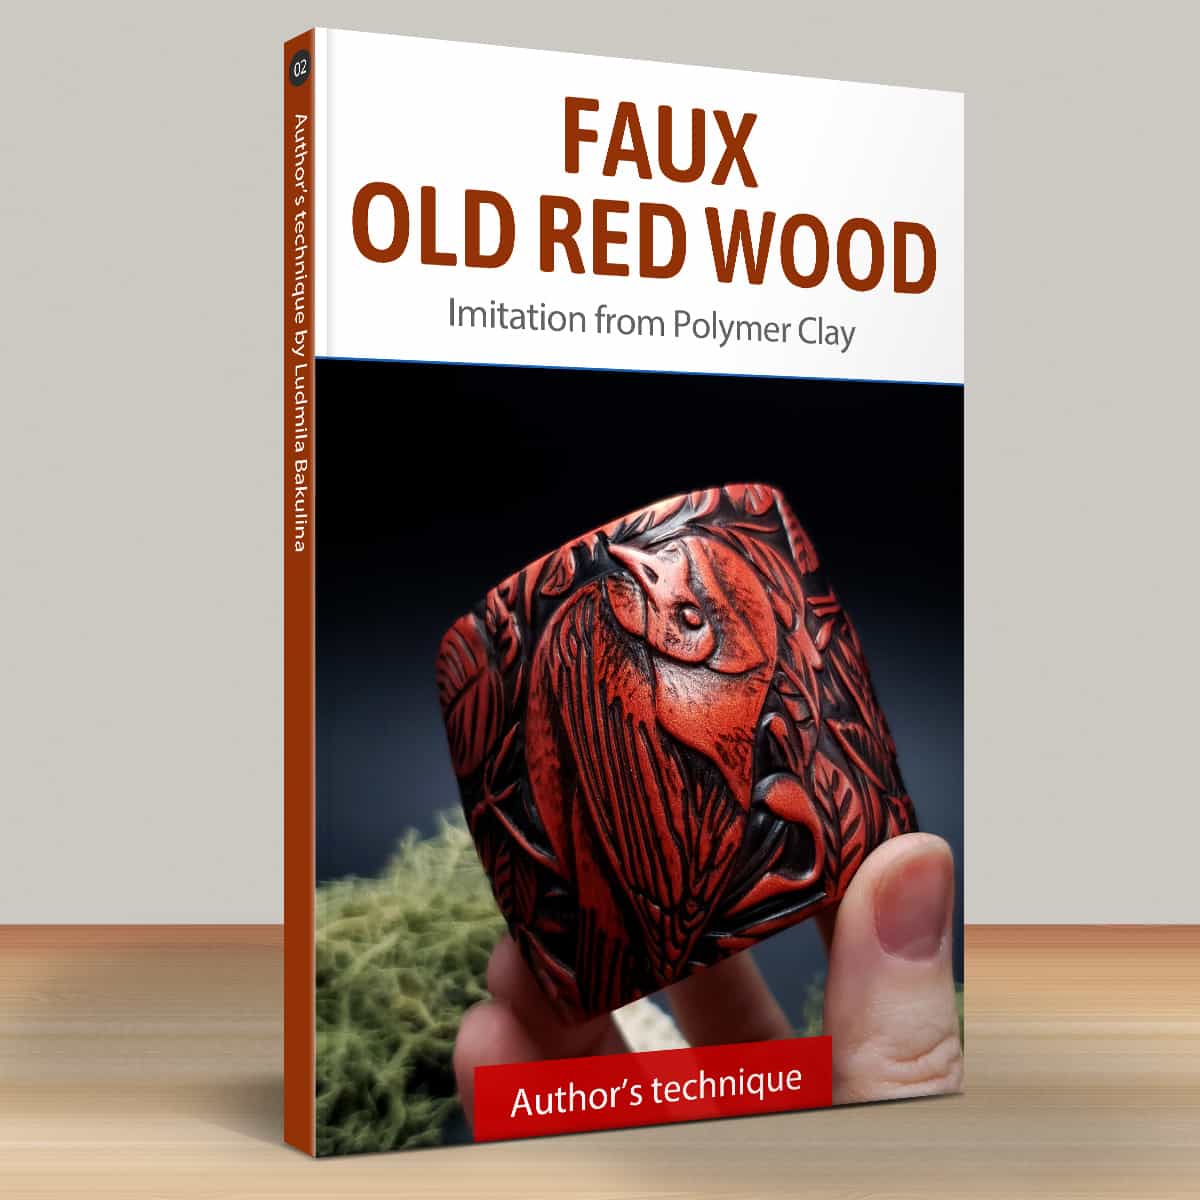 Part 2: Faux Old Red Wood